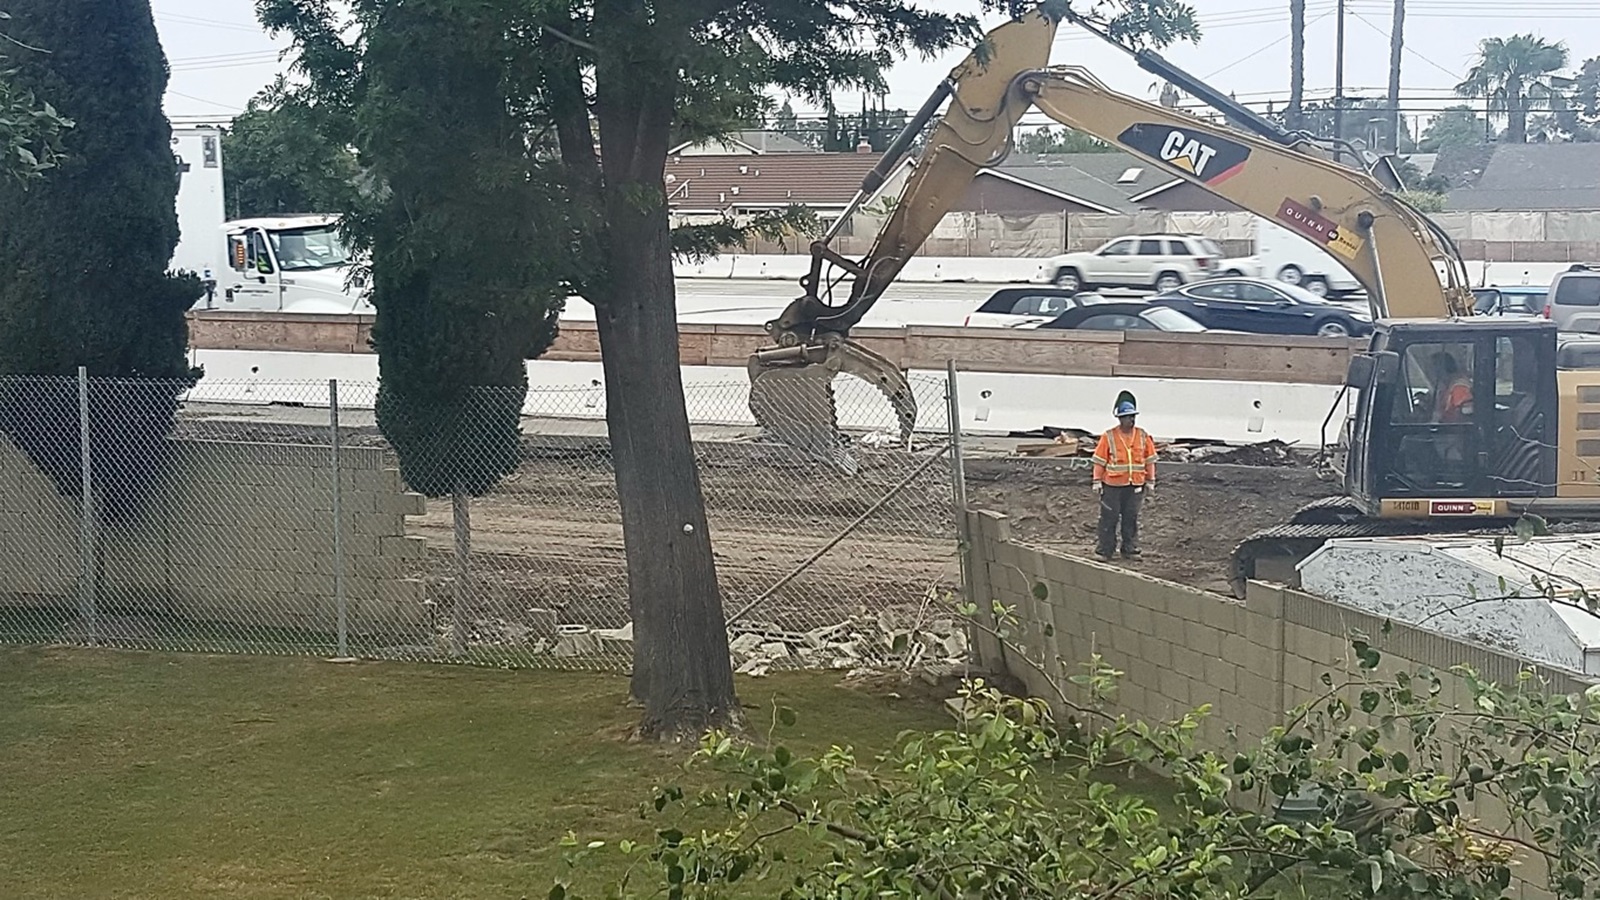 A backhoe and a construction worker at work between a busy freeway and a residential yard with a tree and green grass.